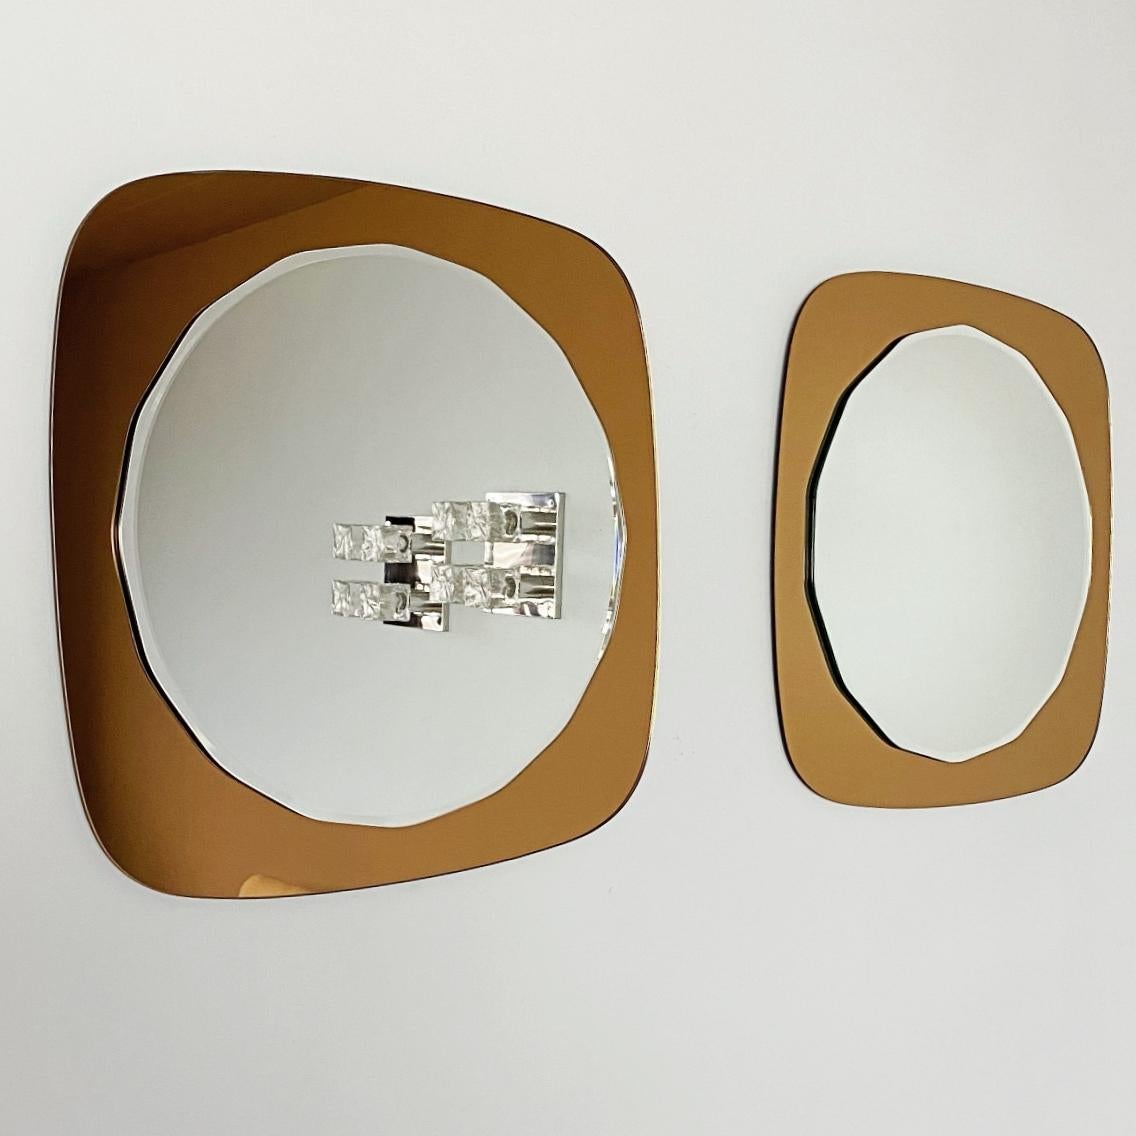 Pair of Crystal Art beautiful faceted mirrors on rose gold crystal glass mirror frame, made in 1970s, Italy. We love to create the illusion of space and decorate any room in contemporary style with such a modern frameless wall mirror.
The mirrors